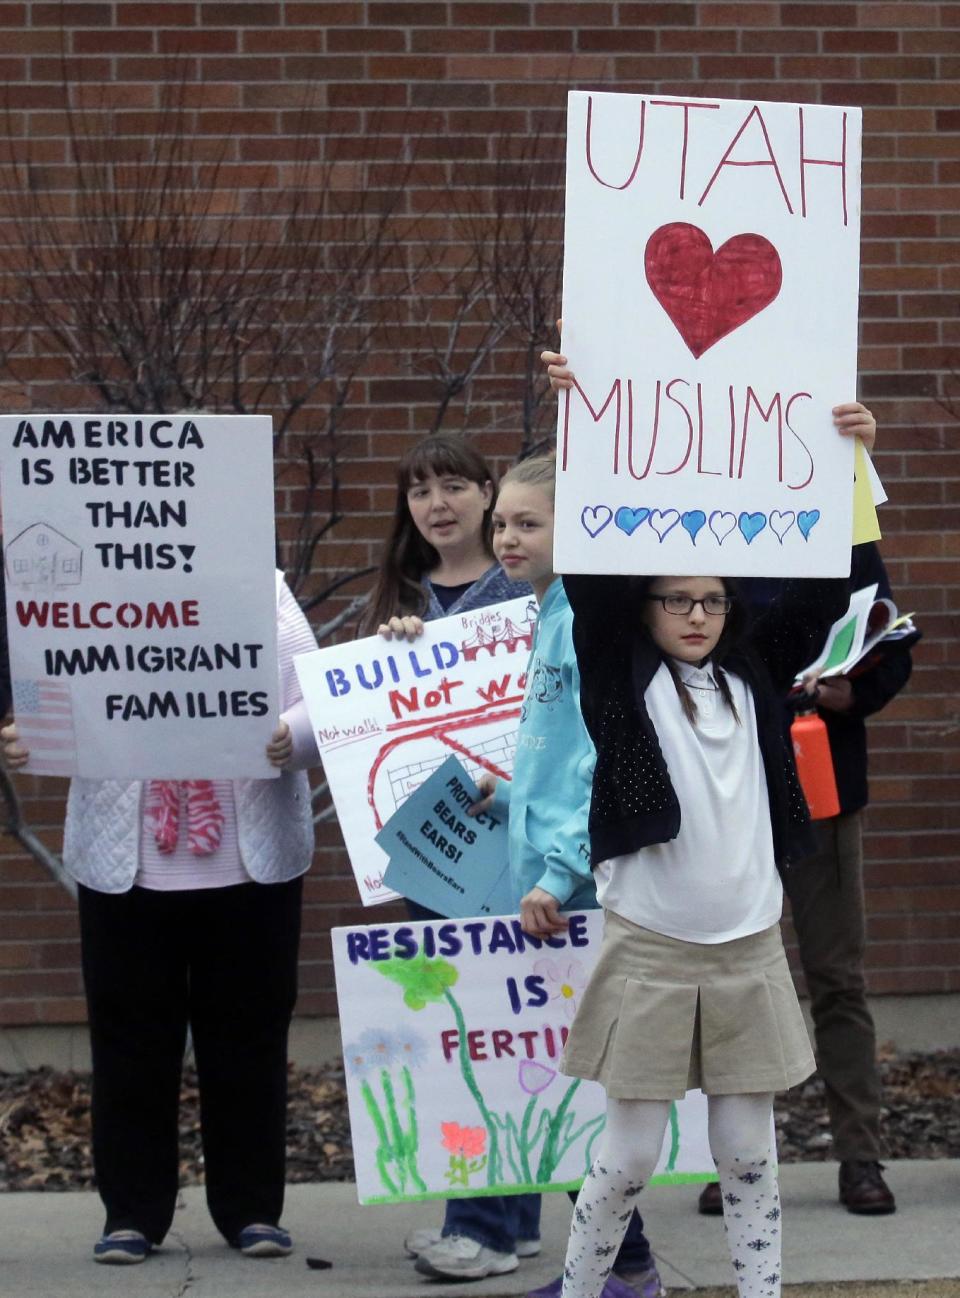 People hold their signs as they gather outside the Brighton High School before U.S. Rep. Jason Chaffetz town hall meeting Thursday, Feb. 9, 2017, in Cottonwood Heights, Utah. His visit came as the congressman spends time in his home state, visiting with Muslim leaders and holding a town hall Thursday night in which he's expected to be greeted by a small band of protesters and face some sharp questions from constituents who are frustrated about his refusal to investigate President Donald Trump's ties to Russia. (AP Photo/Rick Bowmer)